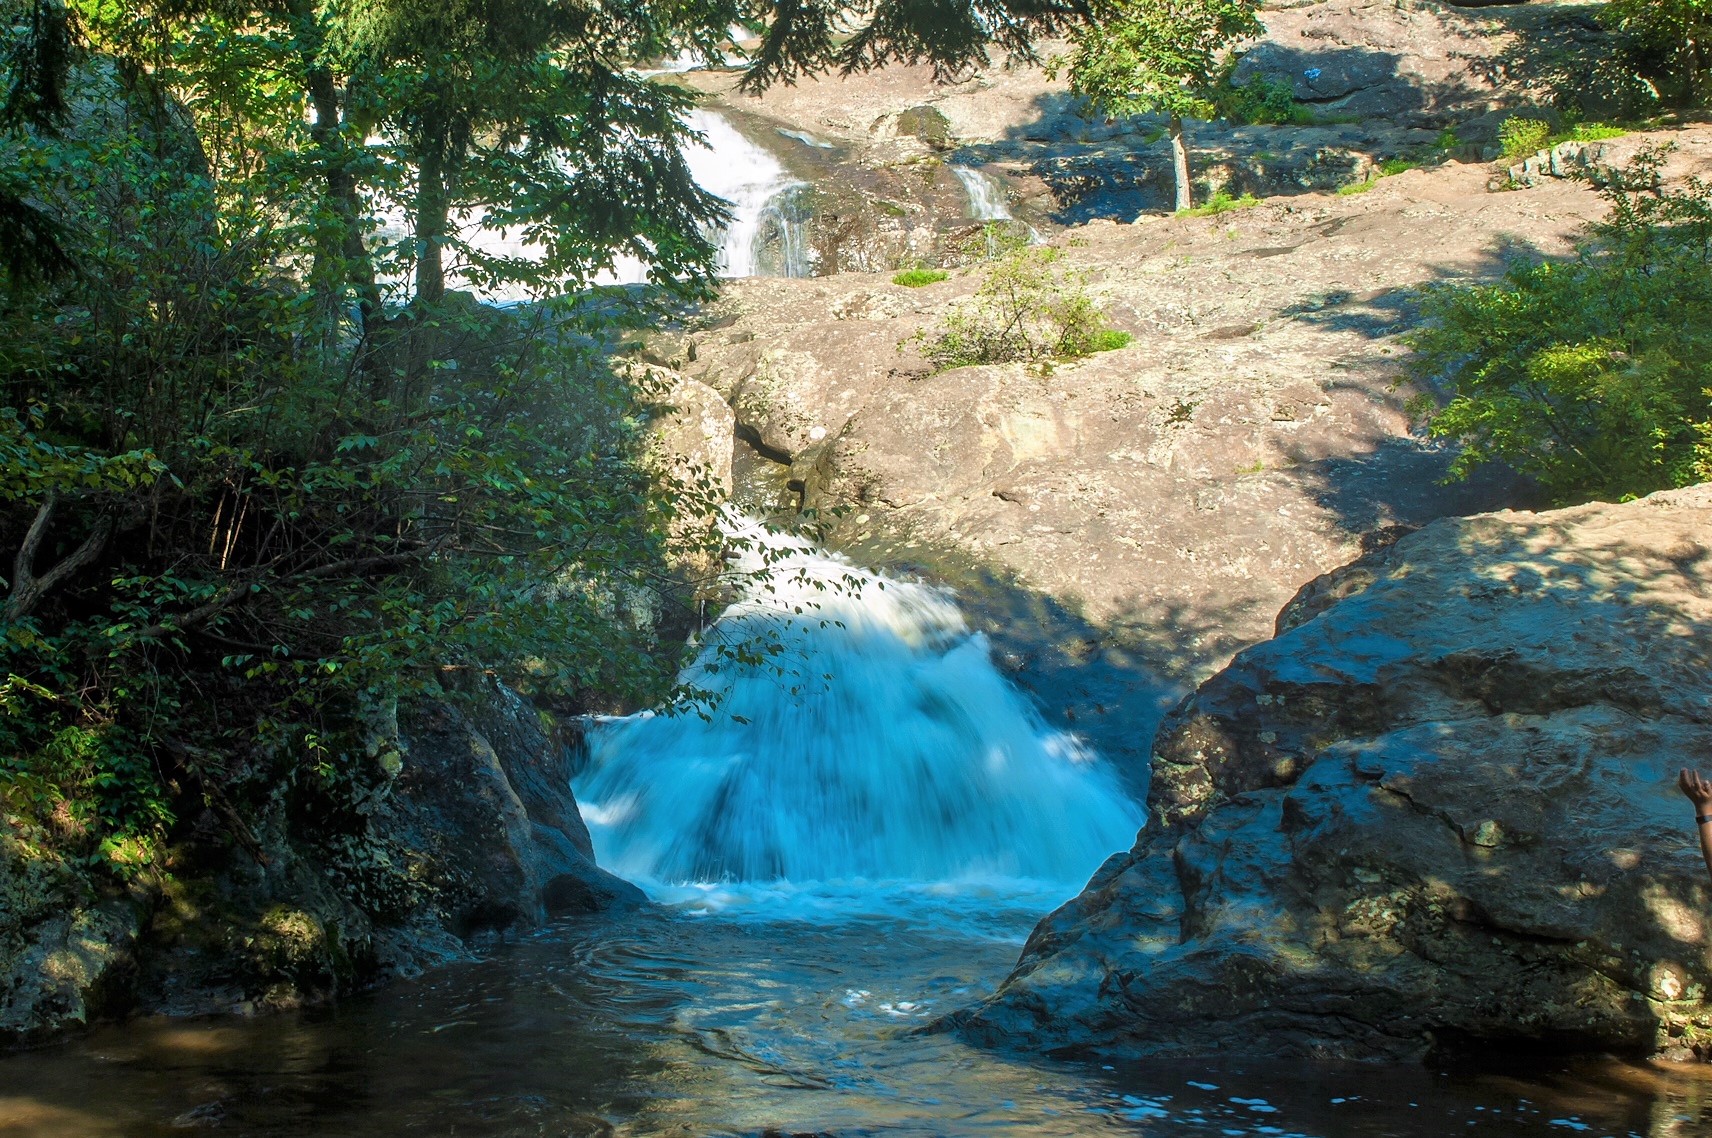 The waterfall at Cunningham Falls State Park